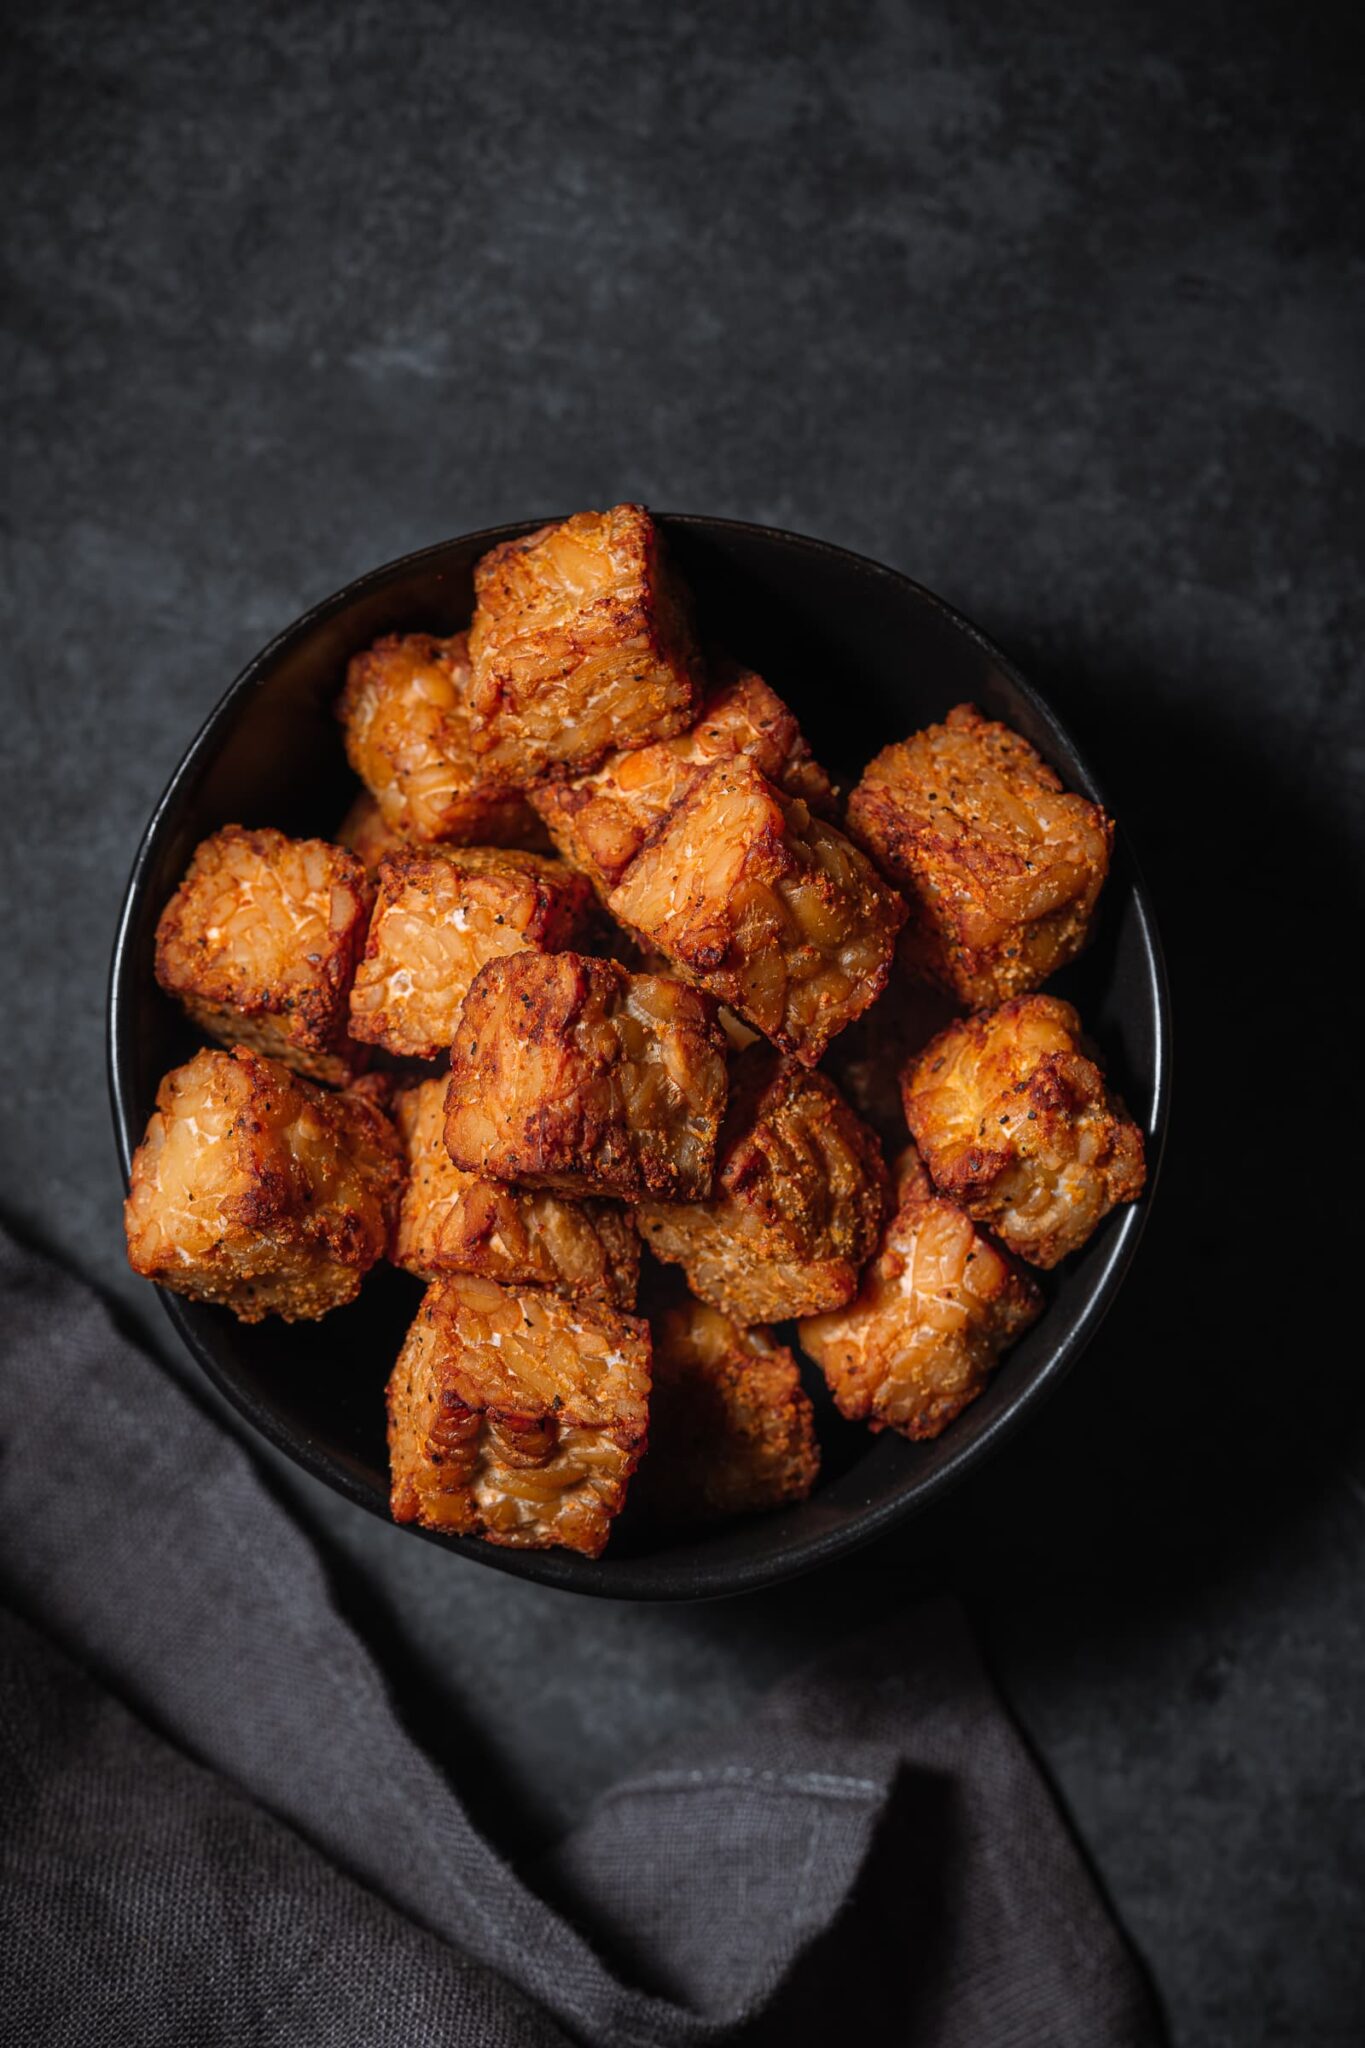 Crispy baked tempeh in a small bowl.